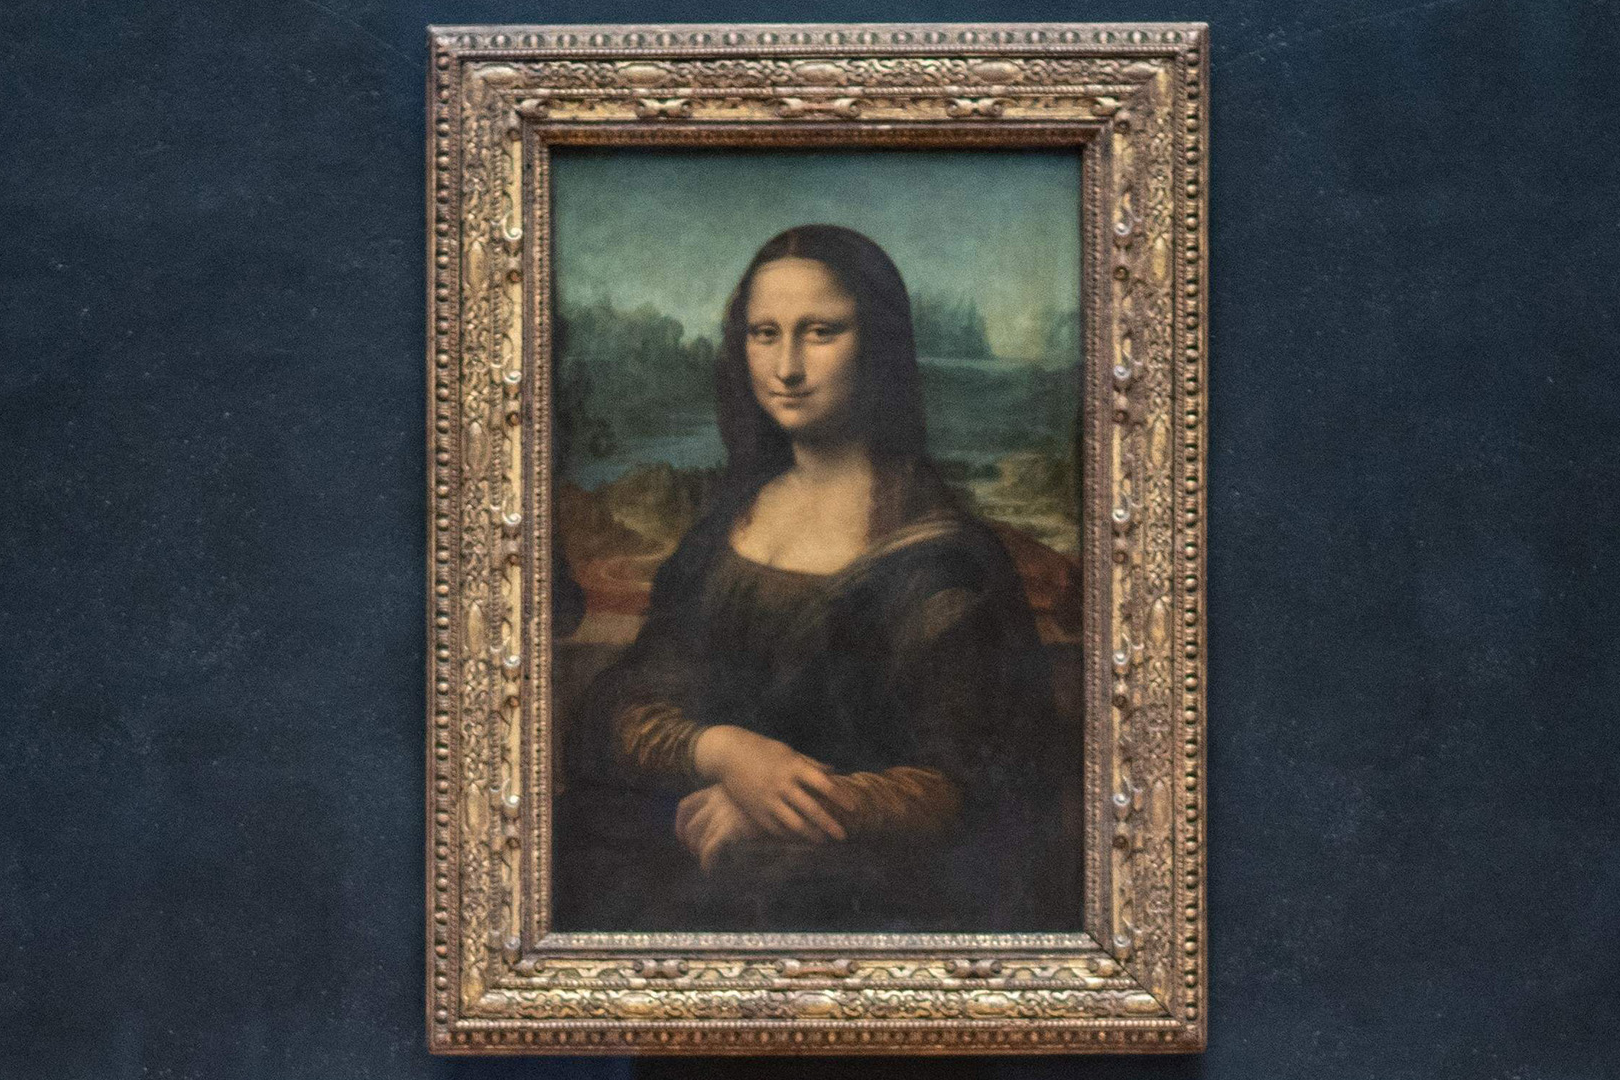 Mona Lisa Big Secret: X-Rays Spill the Beans After 500+ Years